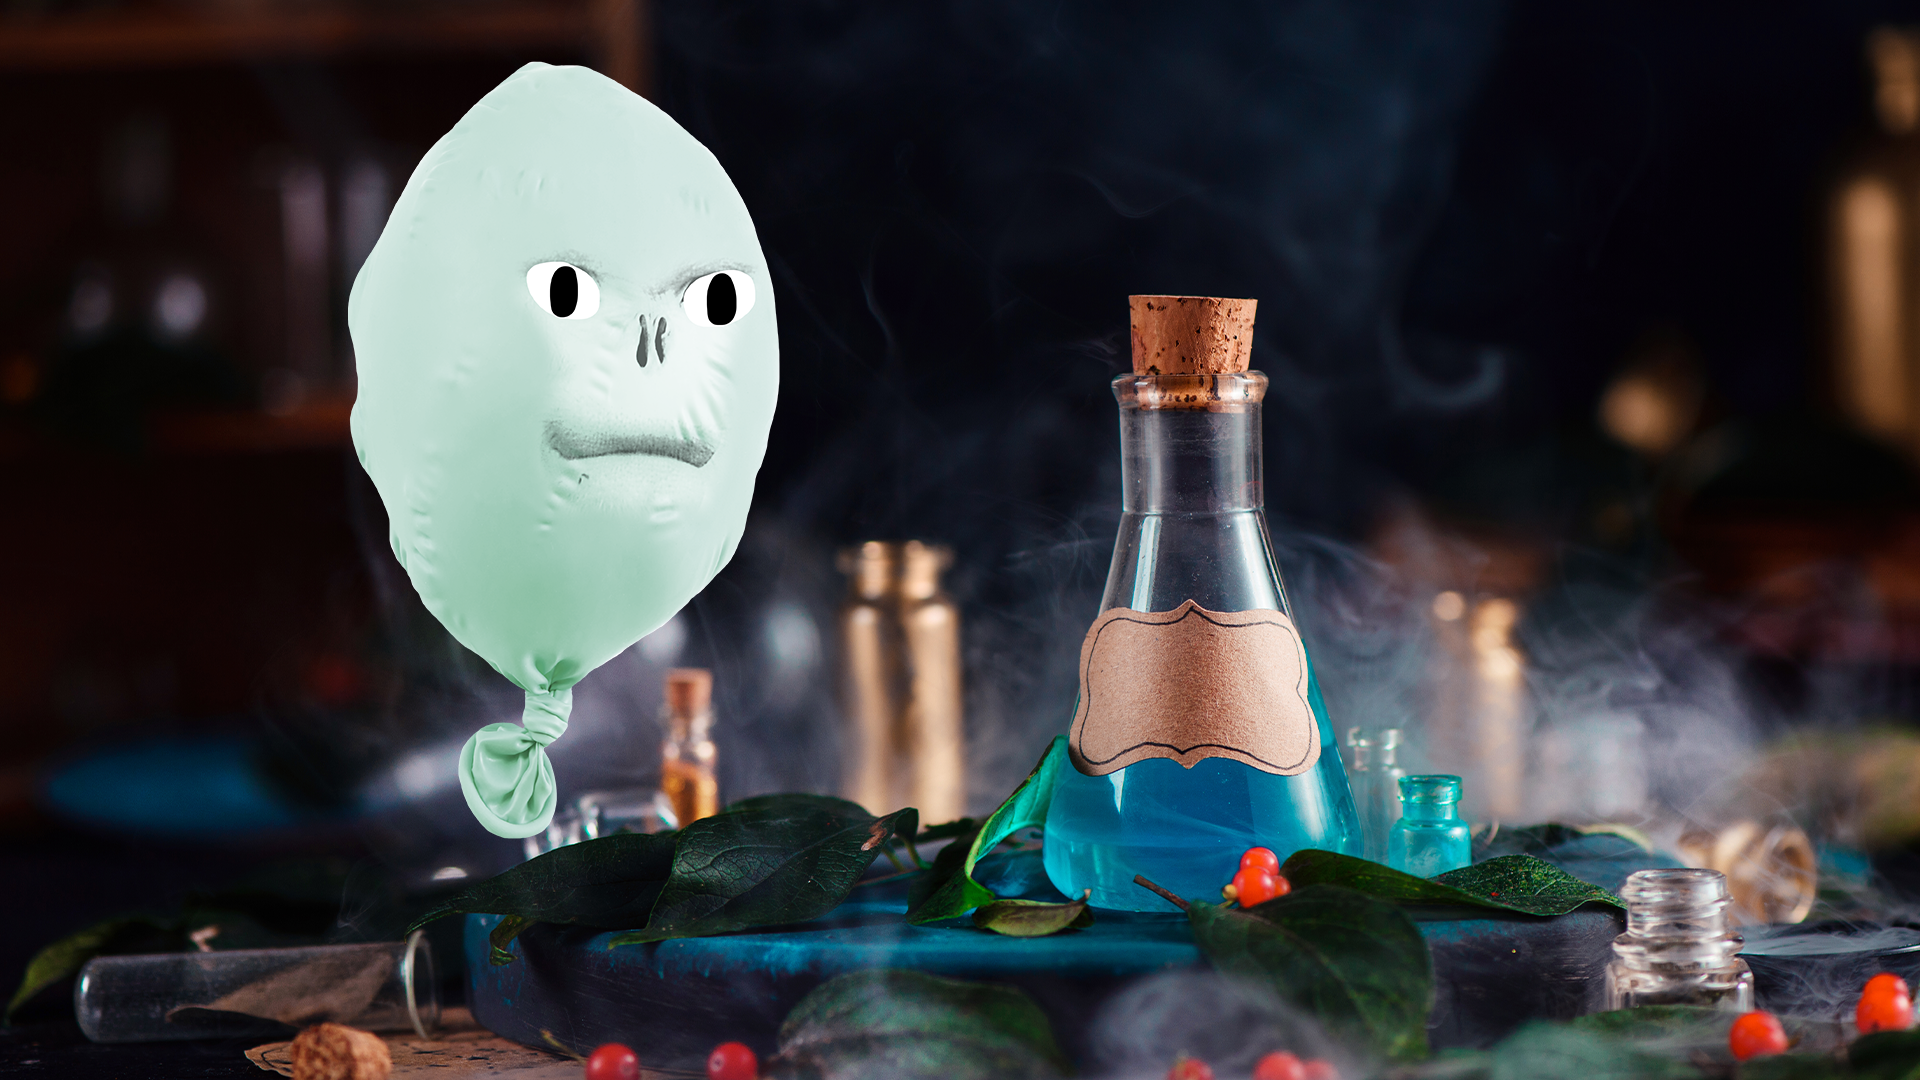 Balloon Voldemort and potions 